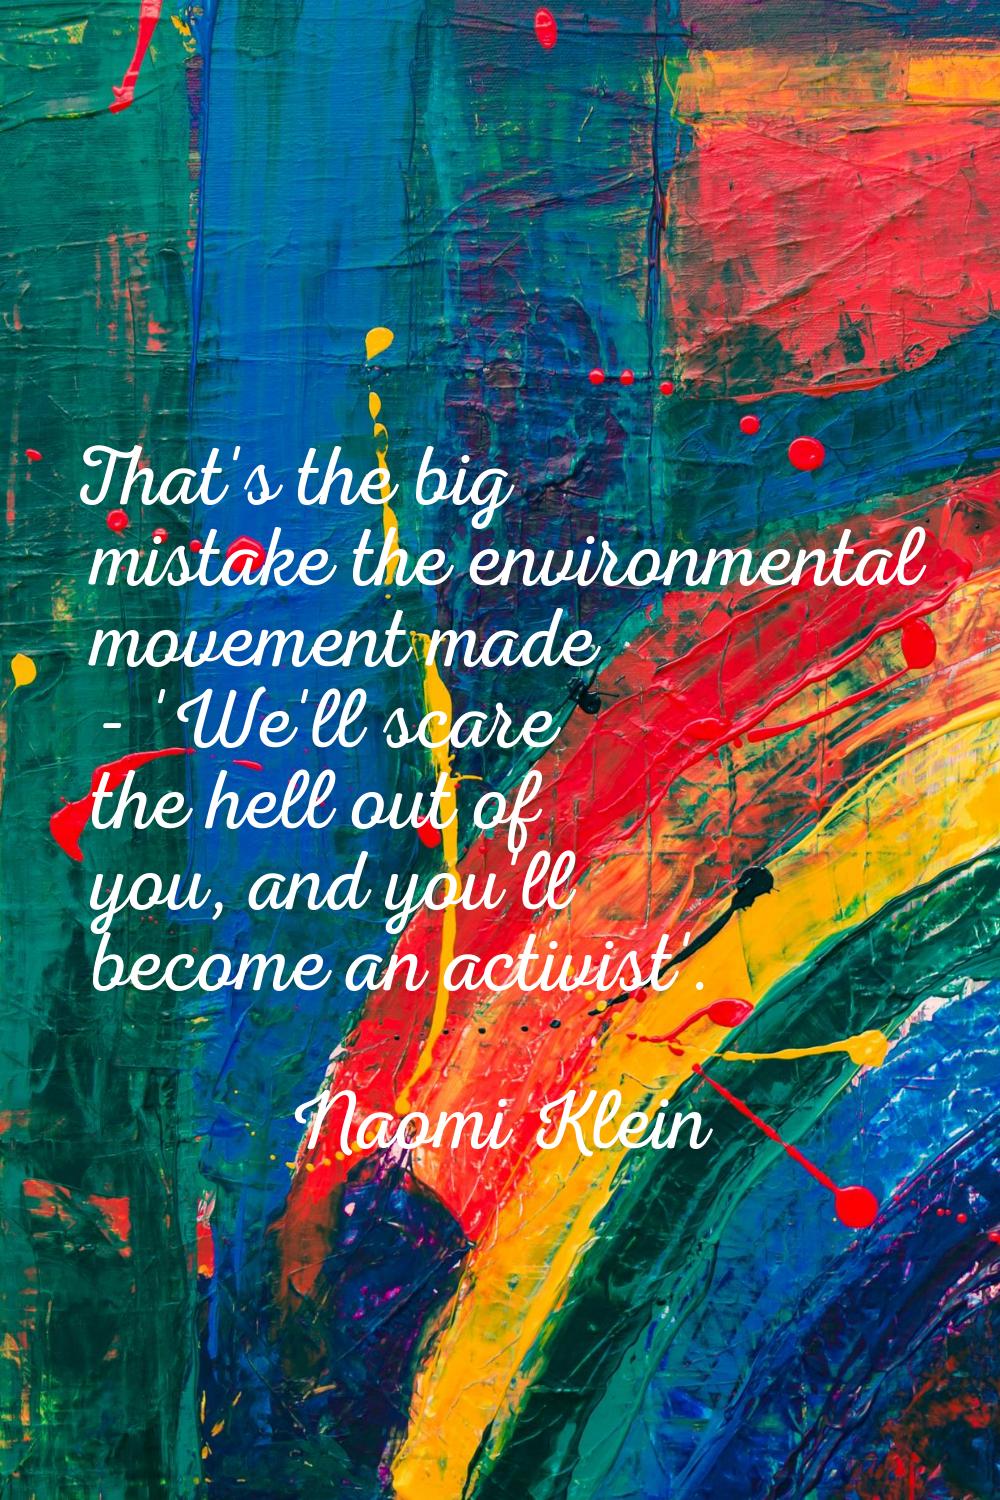 That's the big mistake the environmental movement made - 'We'll scare the hell out of you, and you'